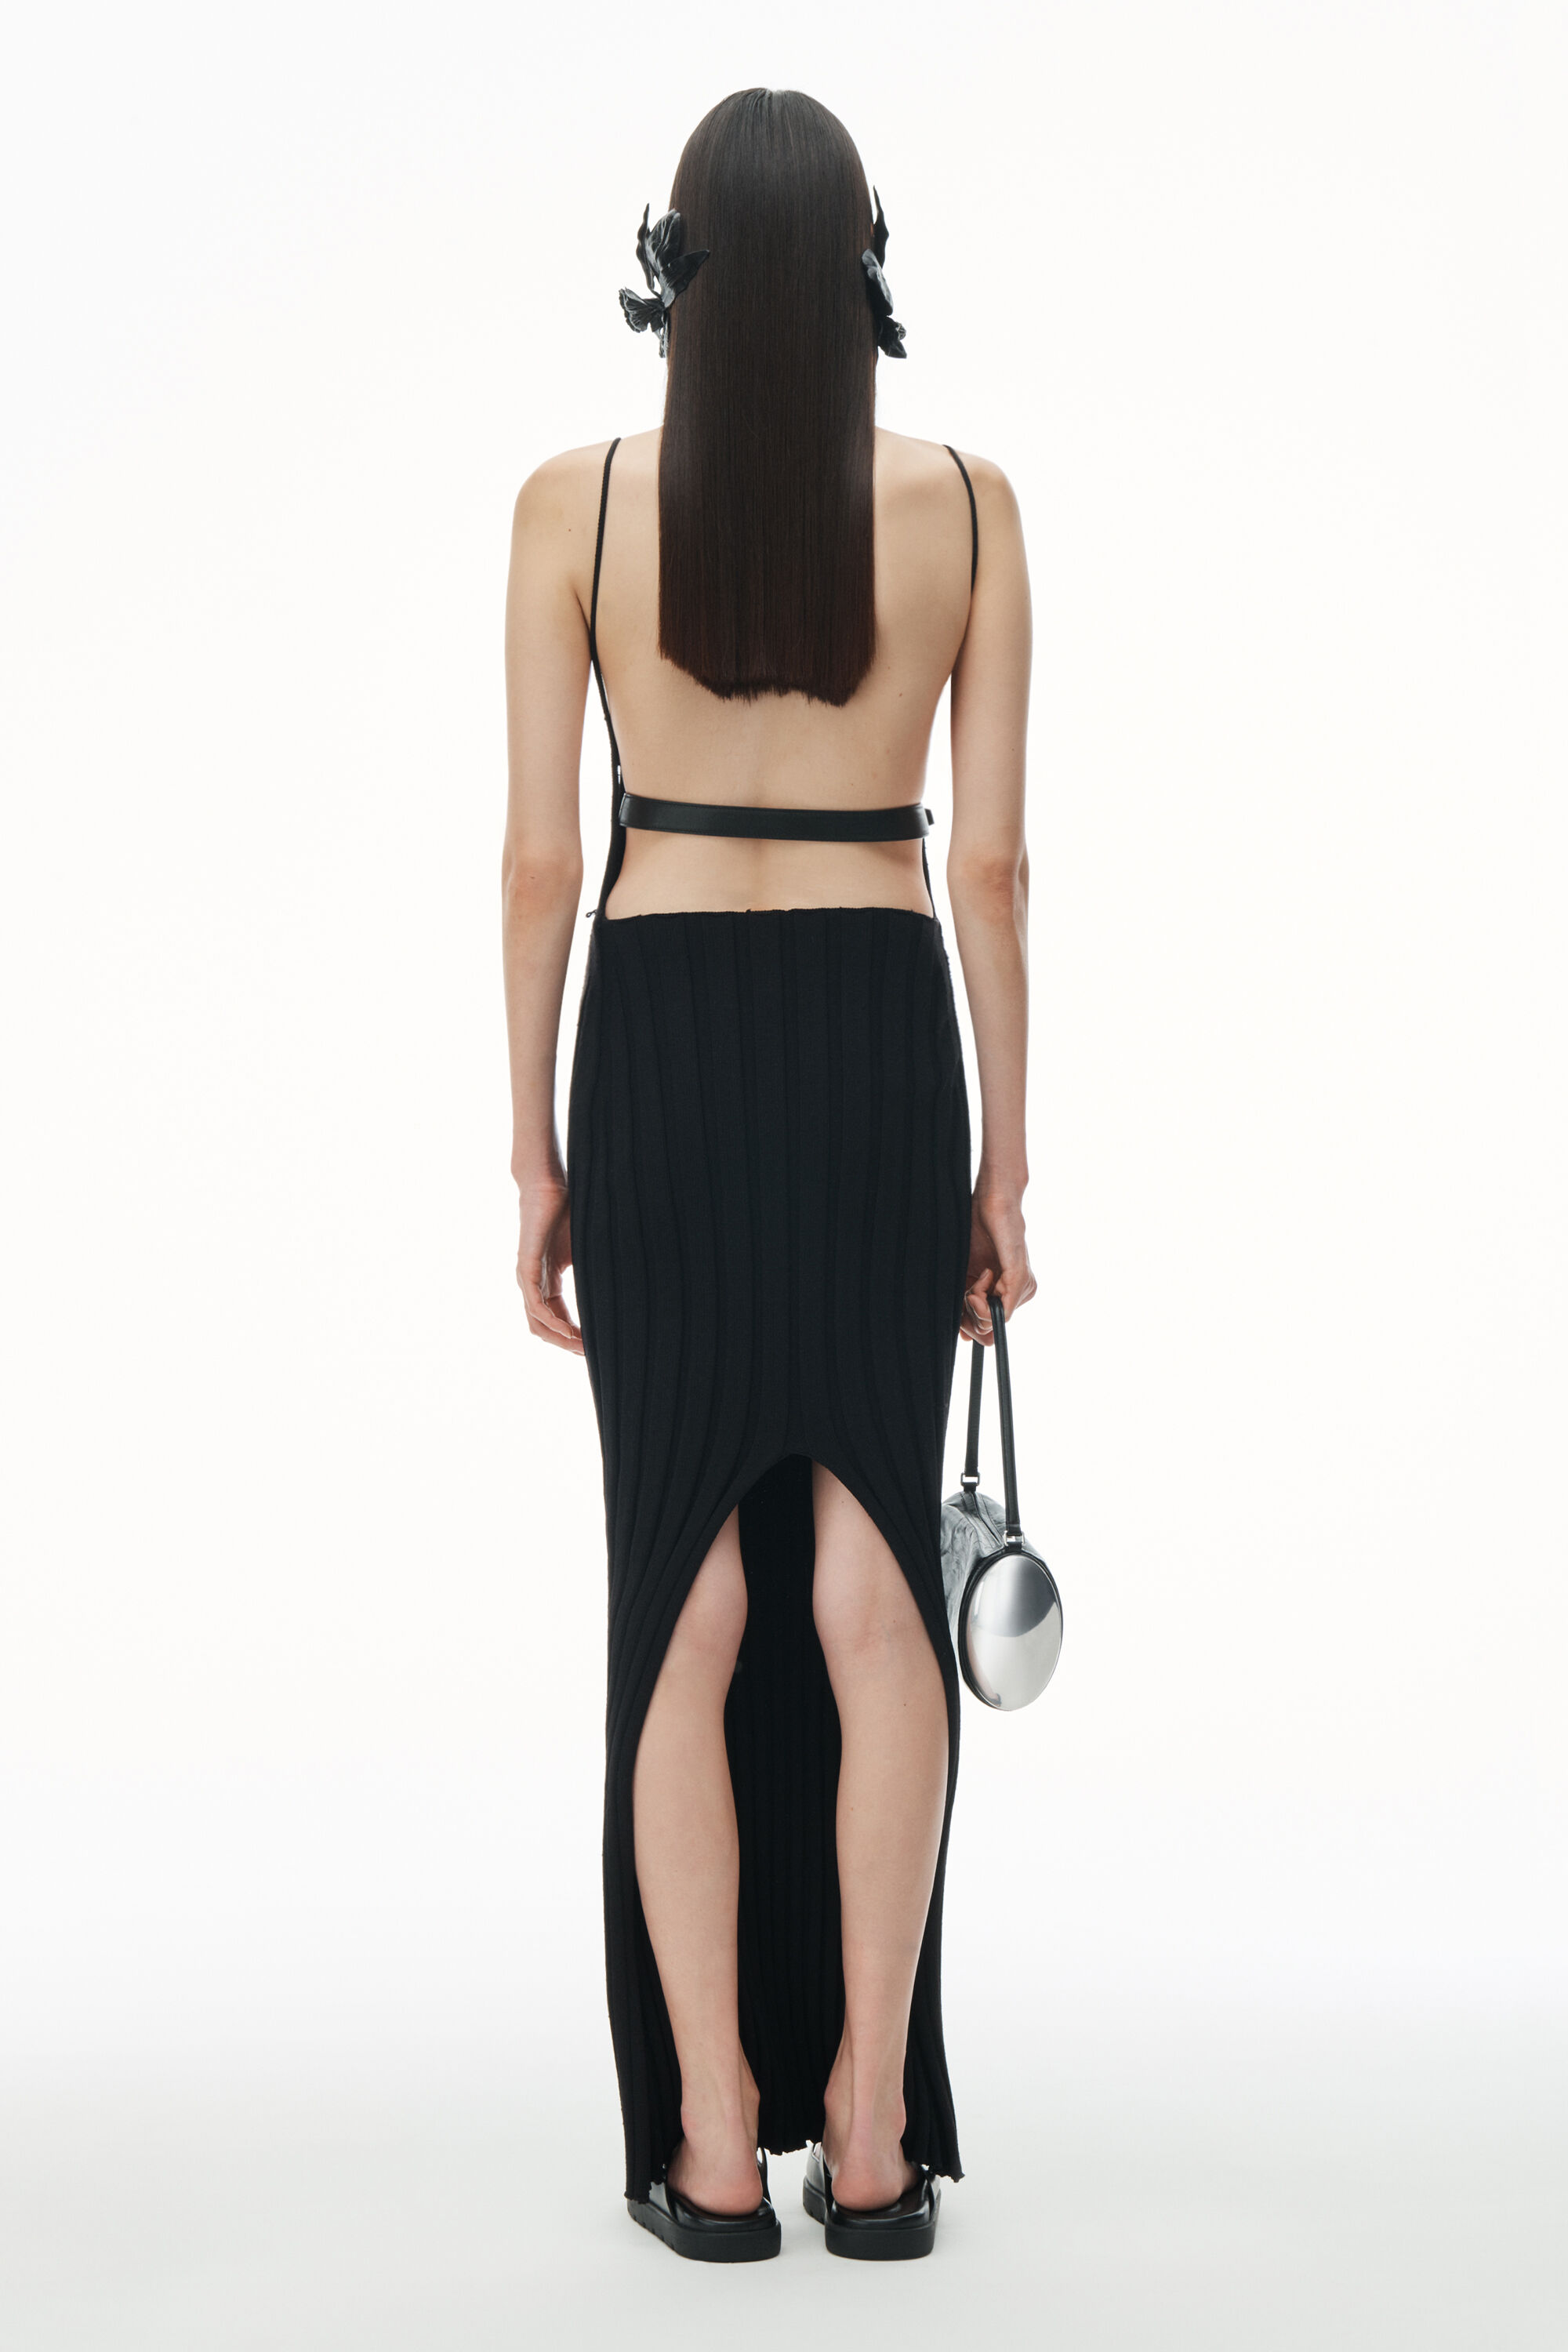 RIBBED TANK DRESS WITH LEATHER BELT in BLACK | camisole neckline 